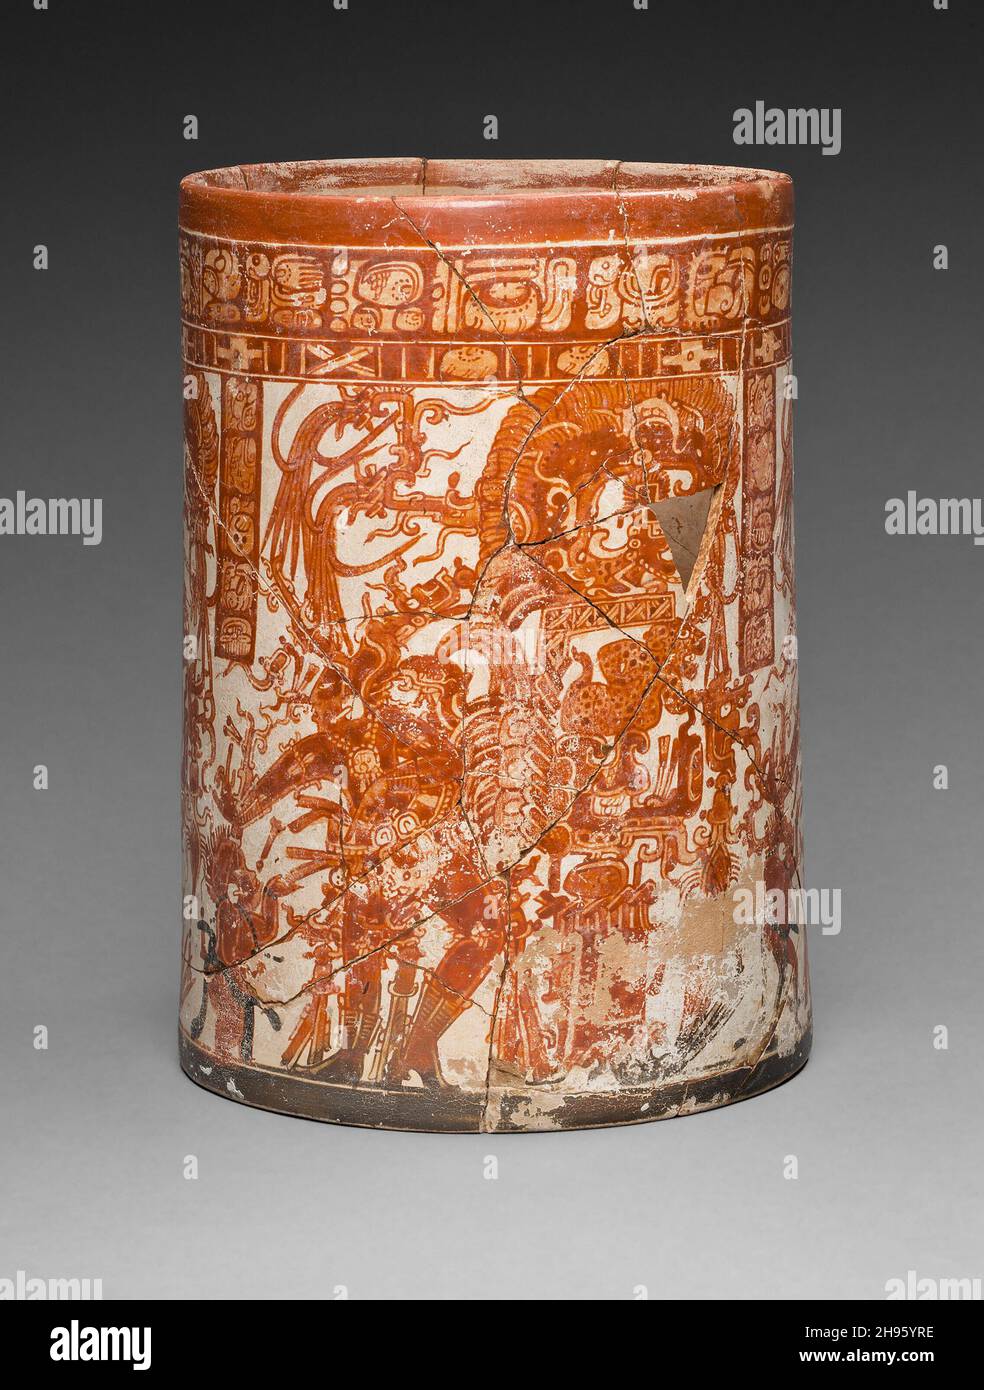 Vessel of the Dancing Lords, A.D. 750/800. Cup-shaped ceramic vessel, Maya ruler dressed as the maize god with red glyphs and dancing figures, orange on cream ground. Possibly painted as a funerary offering. Maya, Naranjo, Pet&#xe9;n, Guatemala. Stock Photo